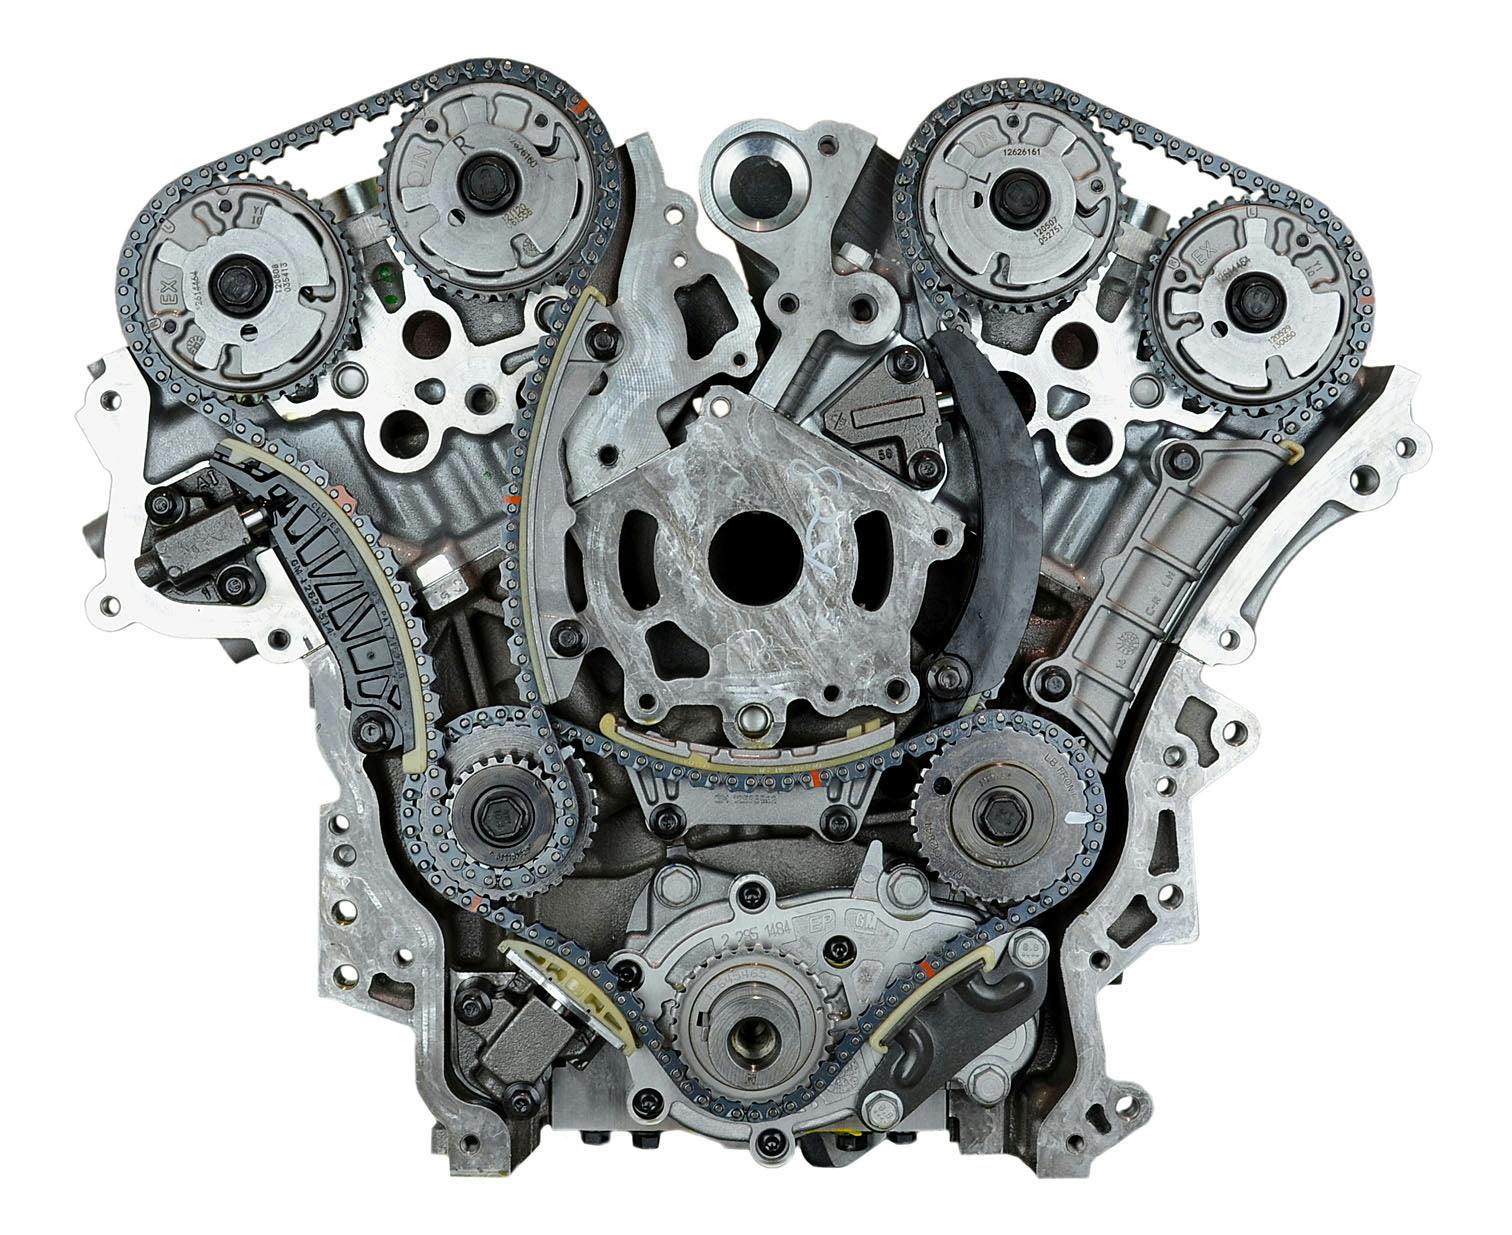 3.6L V6 Engine for 2007-2009 Cadillac CTS/SRX/STS